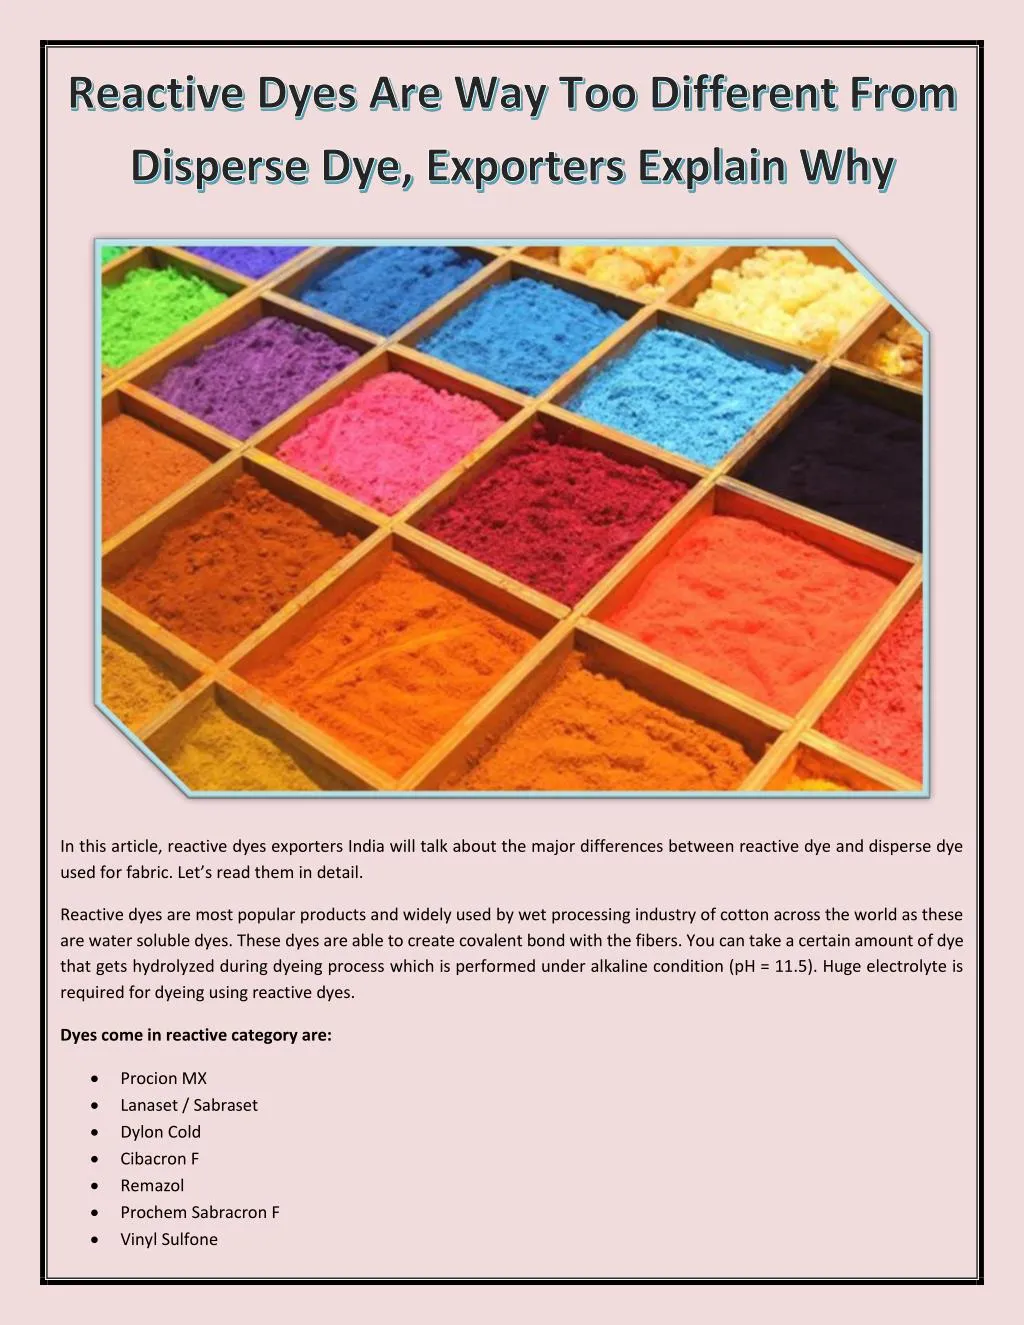 in this article reactive dyes exporters india